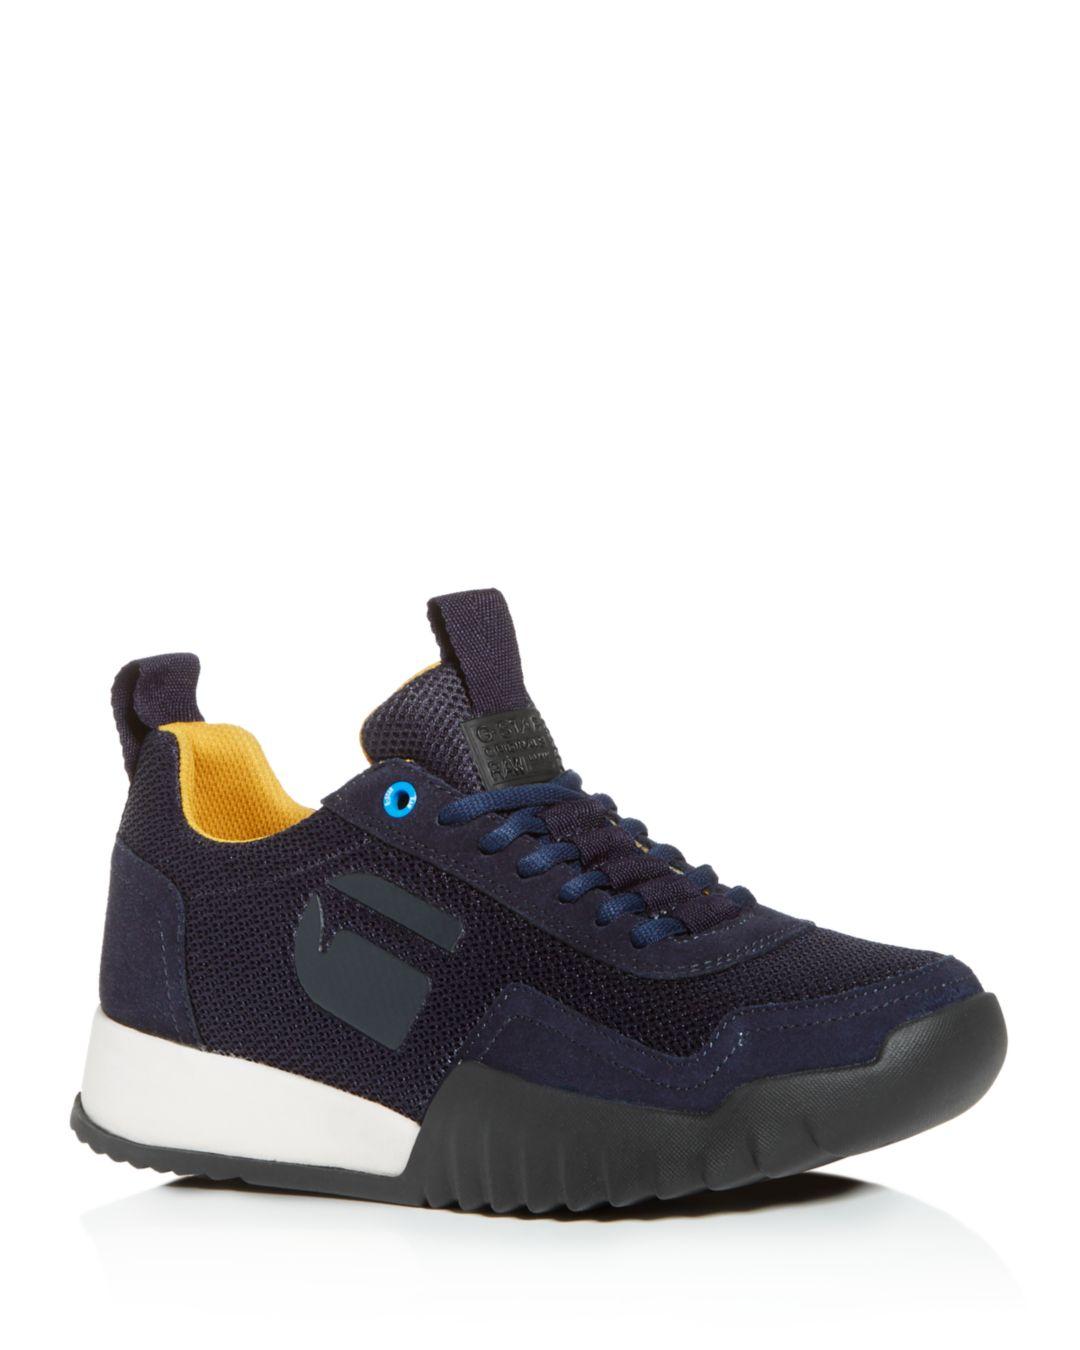 G-Star RAW Leather G - Star Raw Men's Rackam Rovic Low - Top Sneakers in  Navy (Blue) for Men - Lyst